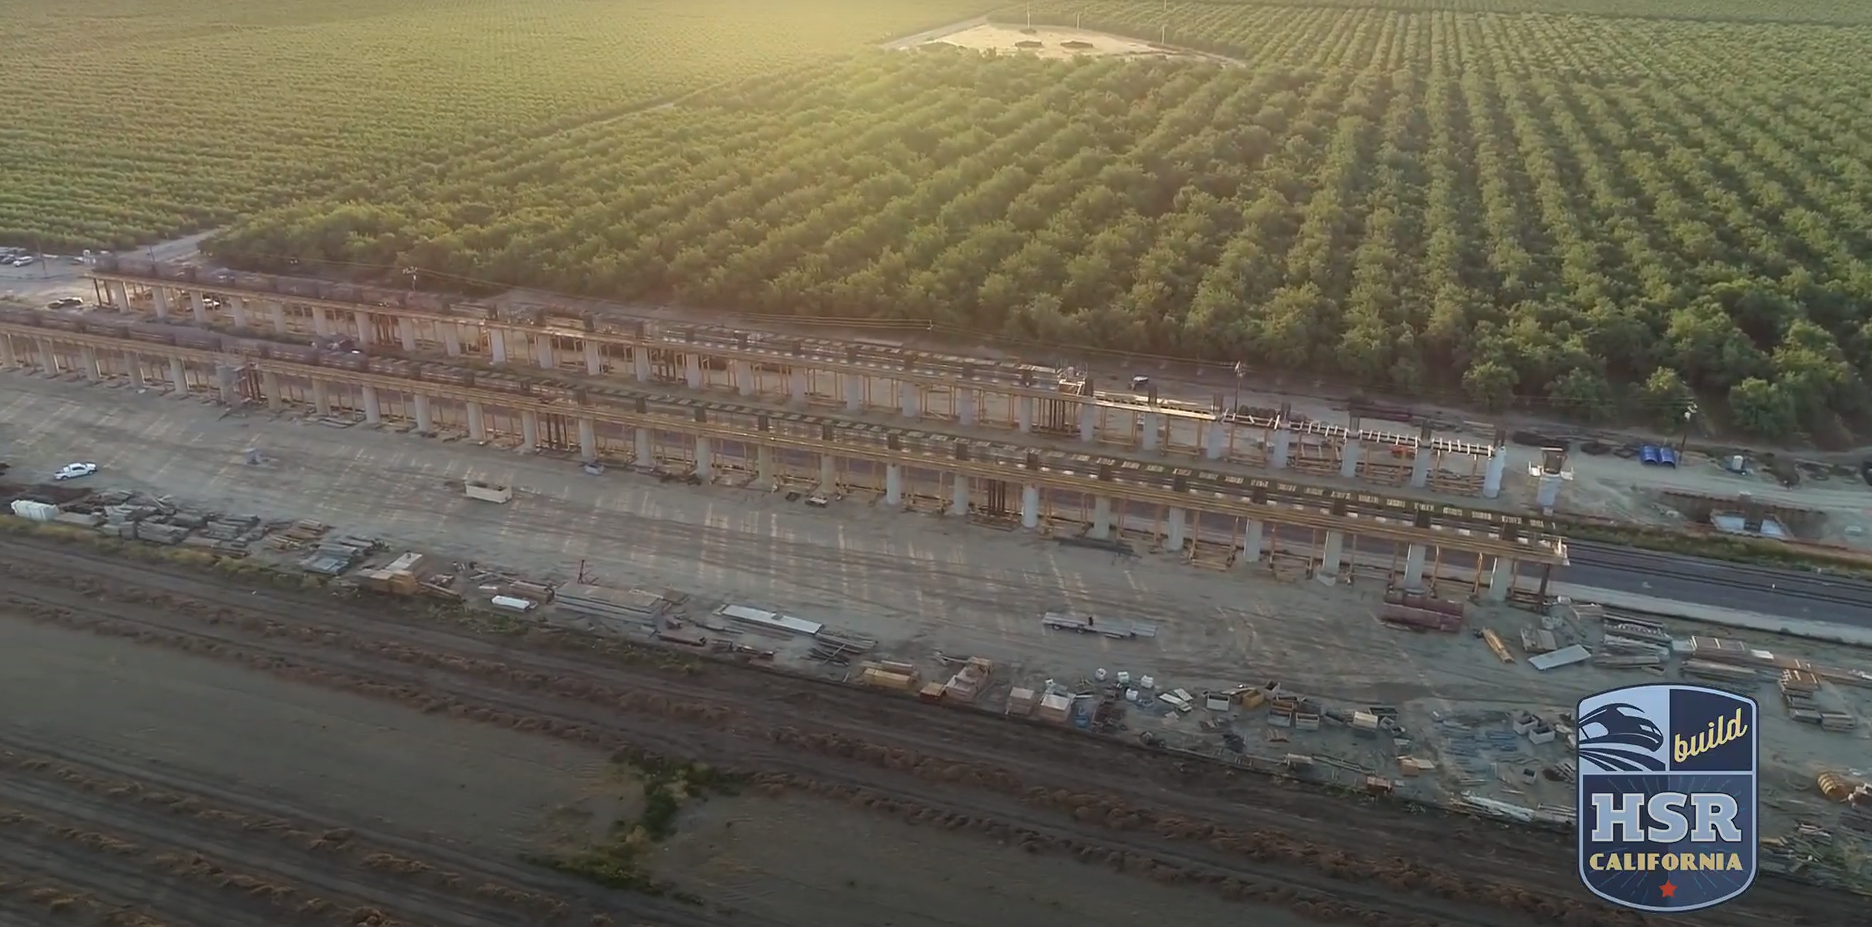 Massive structures such as these can be seen over 100 miles of the Central Valley. Photo: CAHSRA